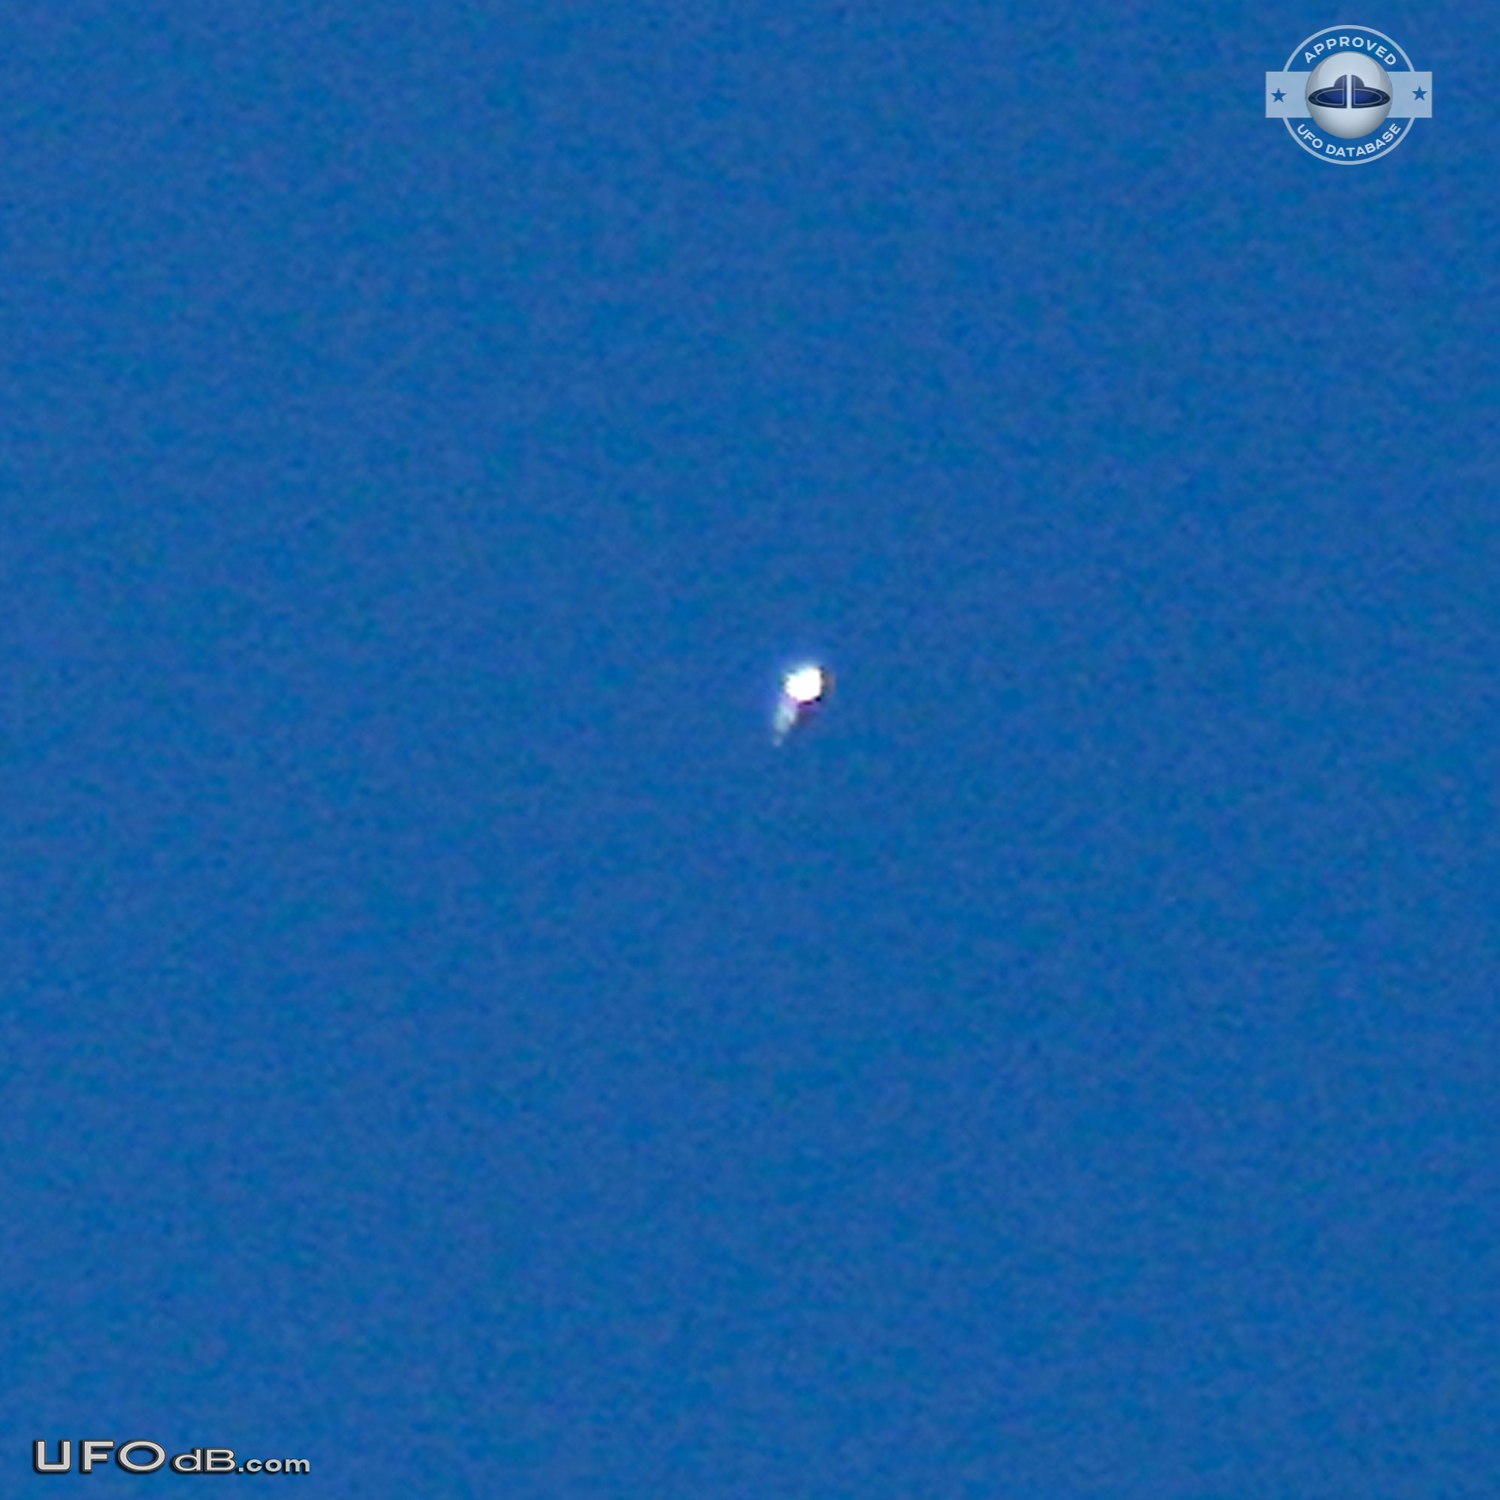 Very bright reflective UFO - Thousands Oaks California - pictures 2012 UFO Picture #516-2